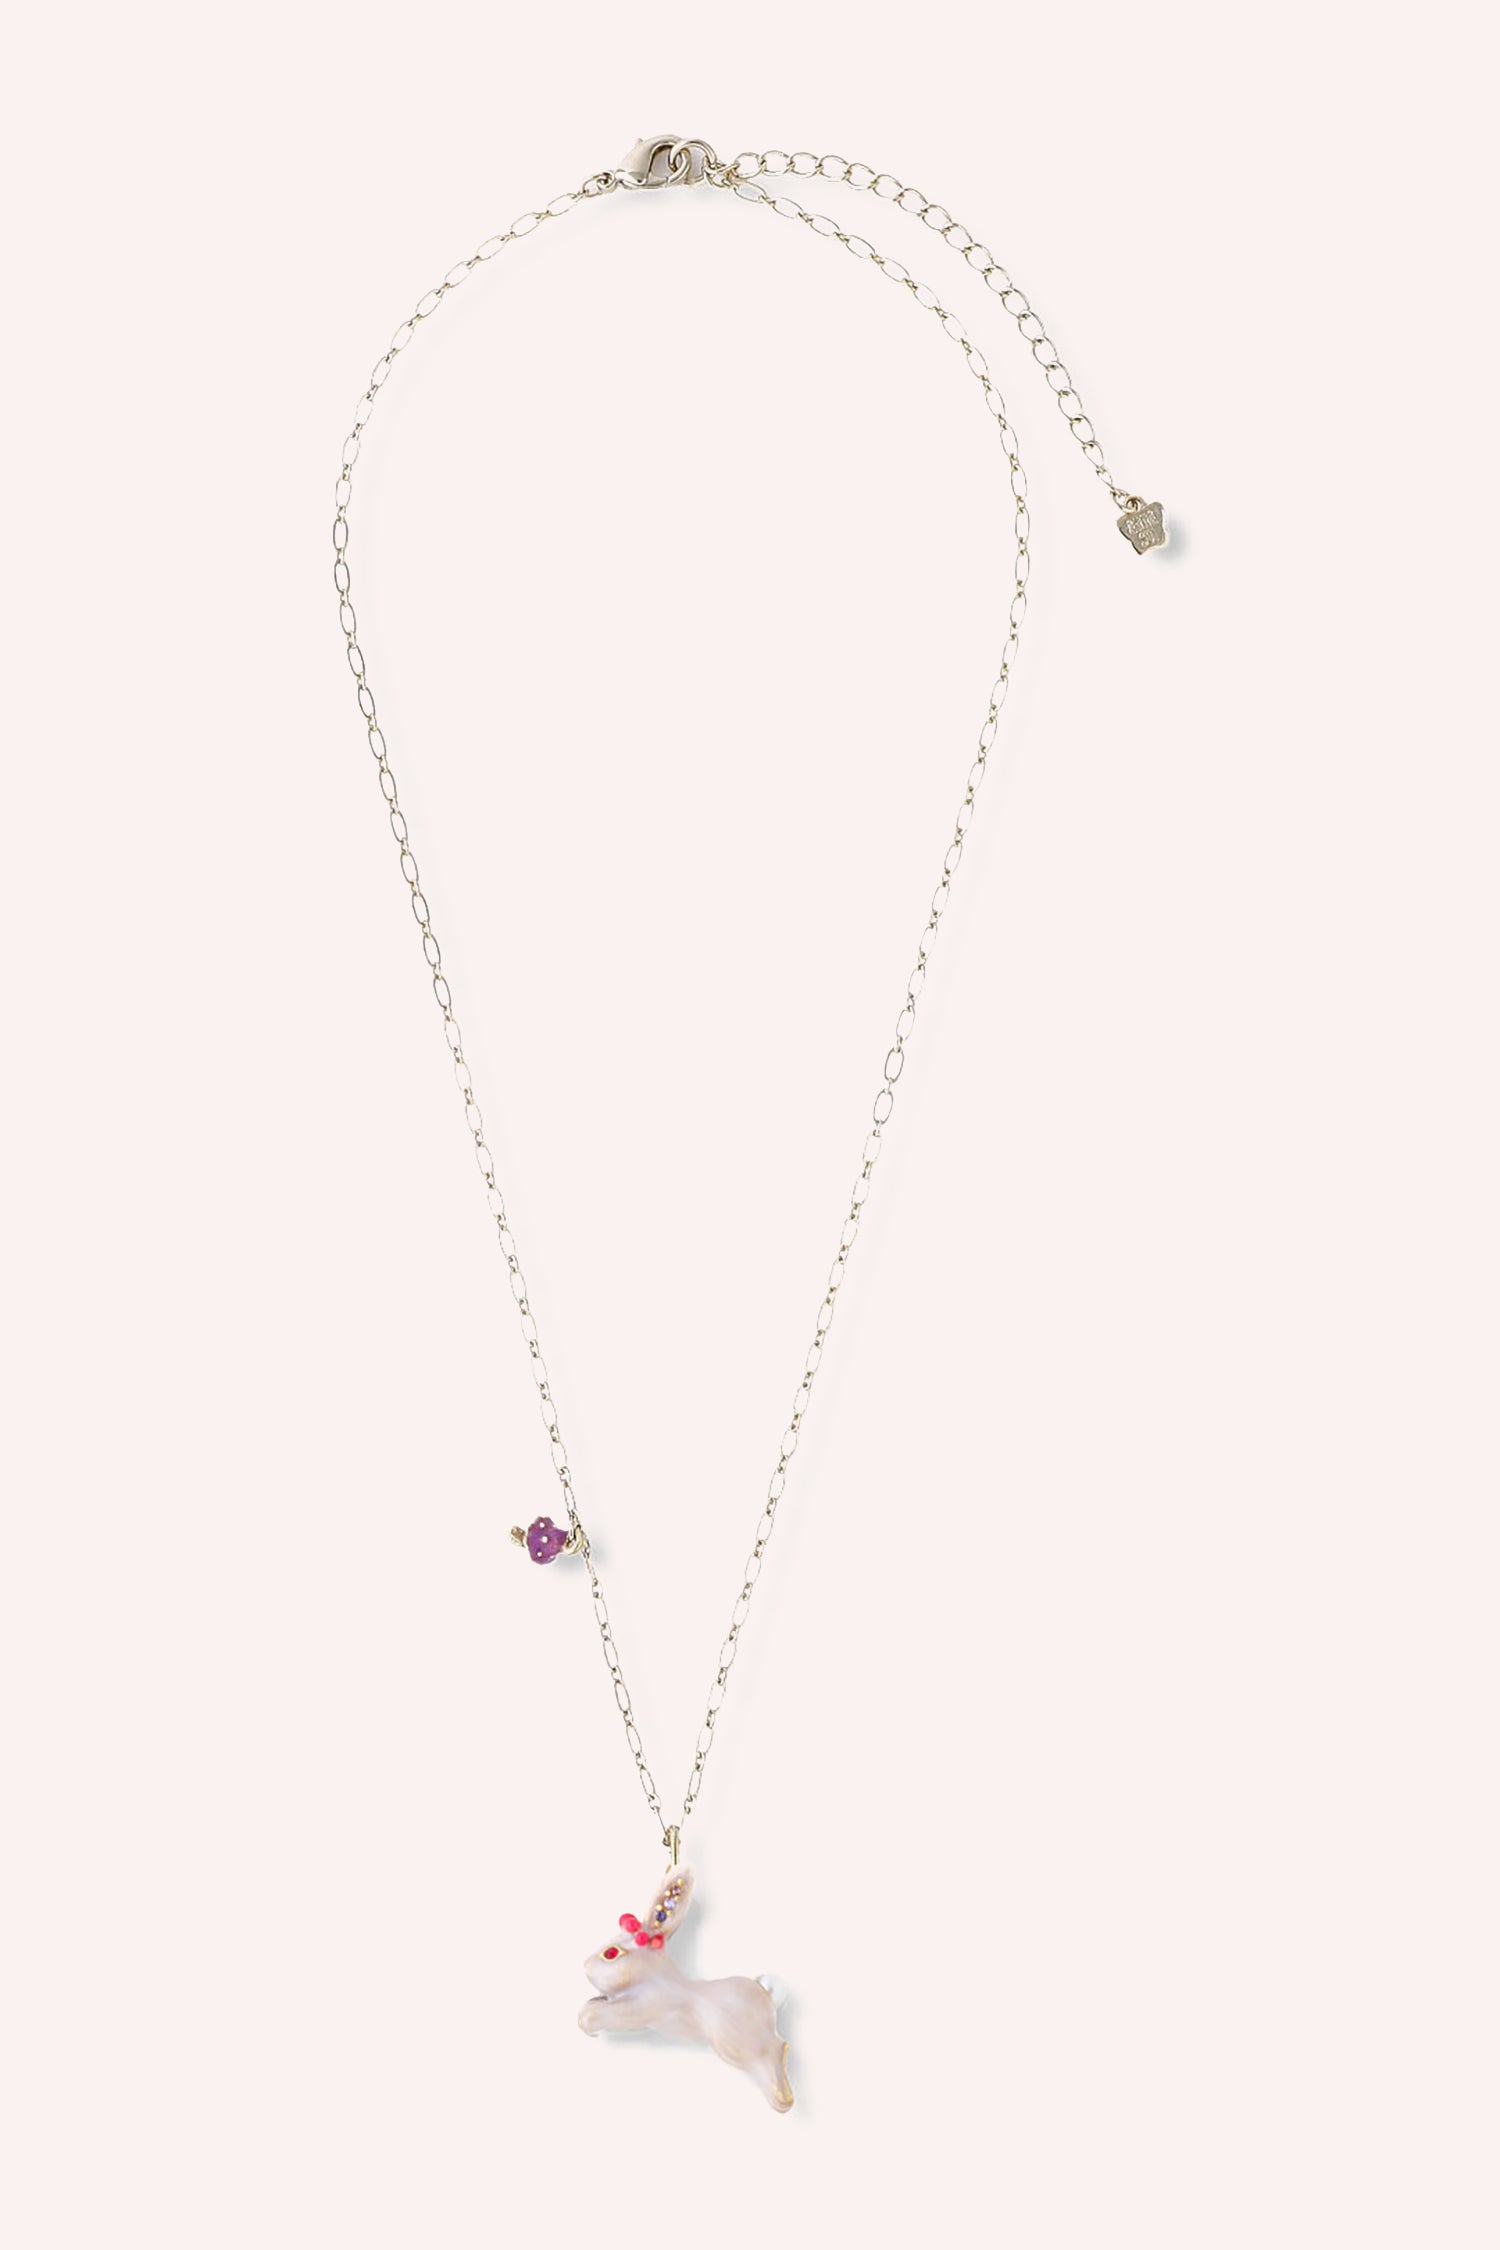 Necklace, Gold toned chain, white rabbit charm with red eye gems, purple ear gems, and red crown